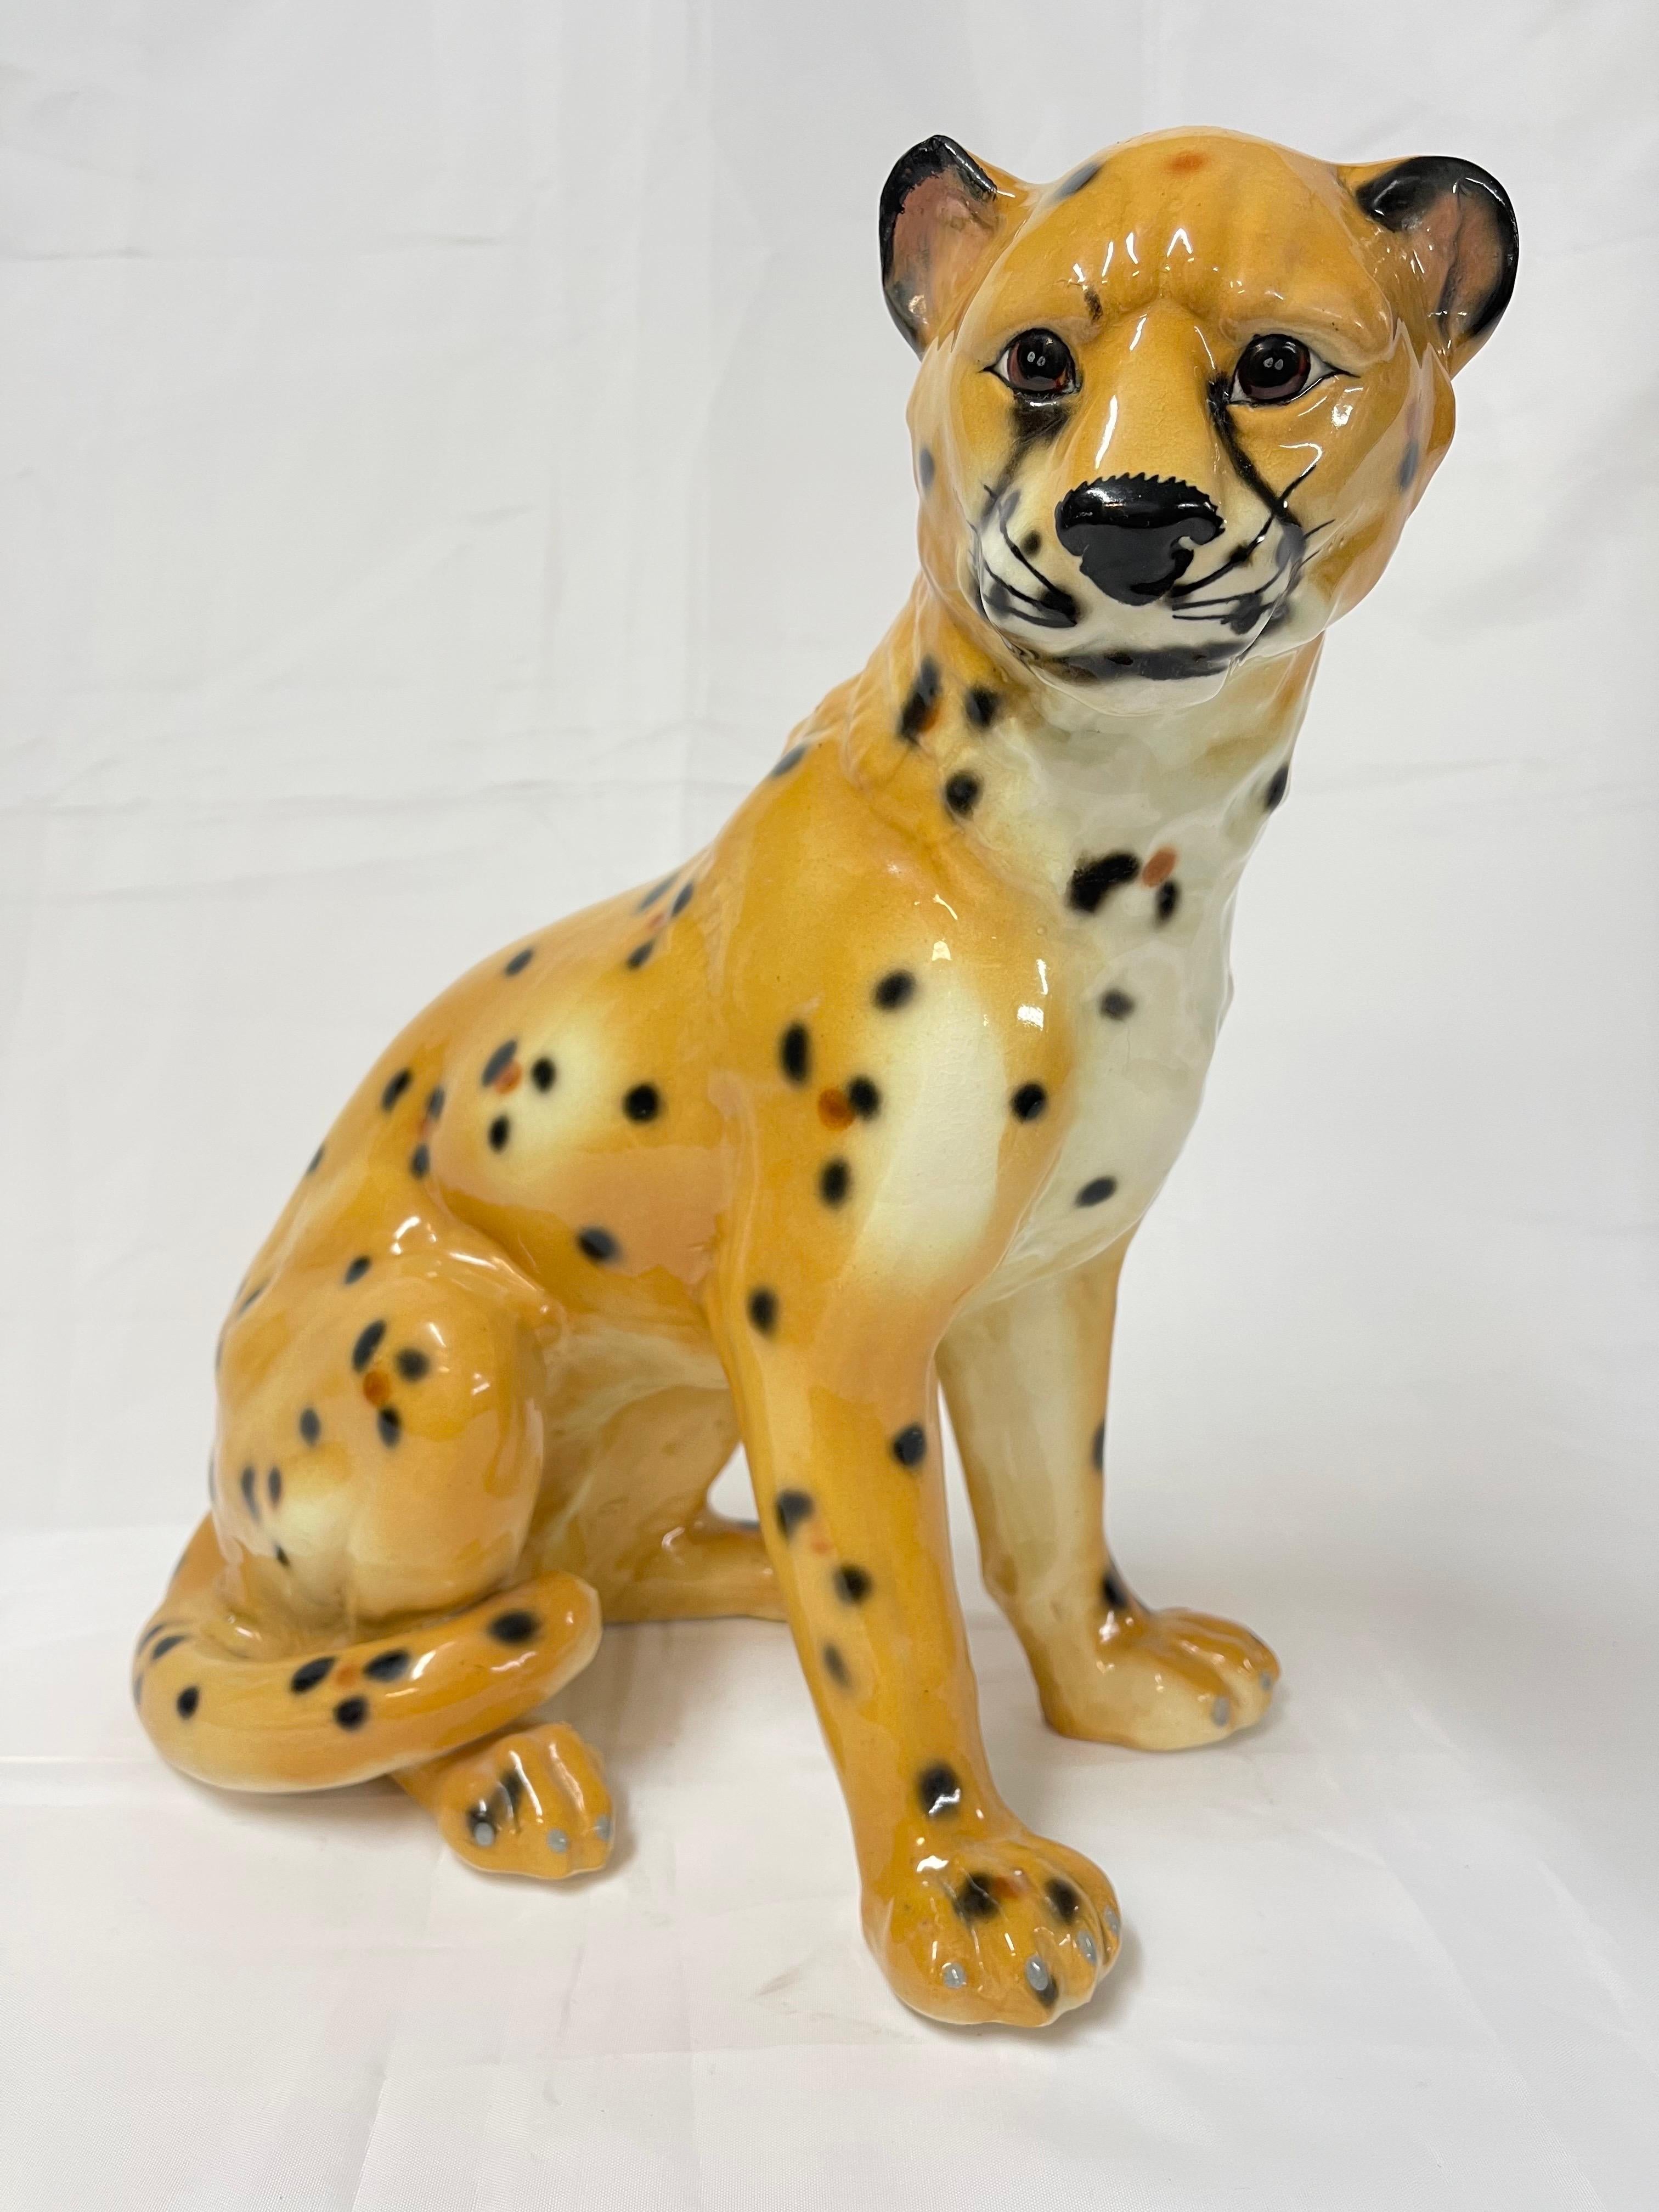 1970's Large Italian Ceramic Cheetah. This fabulous Hollywood Glam sculpture would be the perfect centerpiece. Unmarked but most likely Italian.